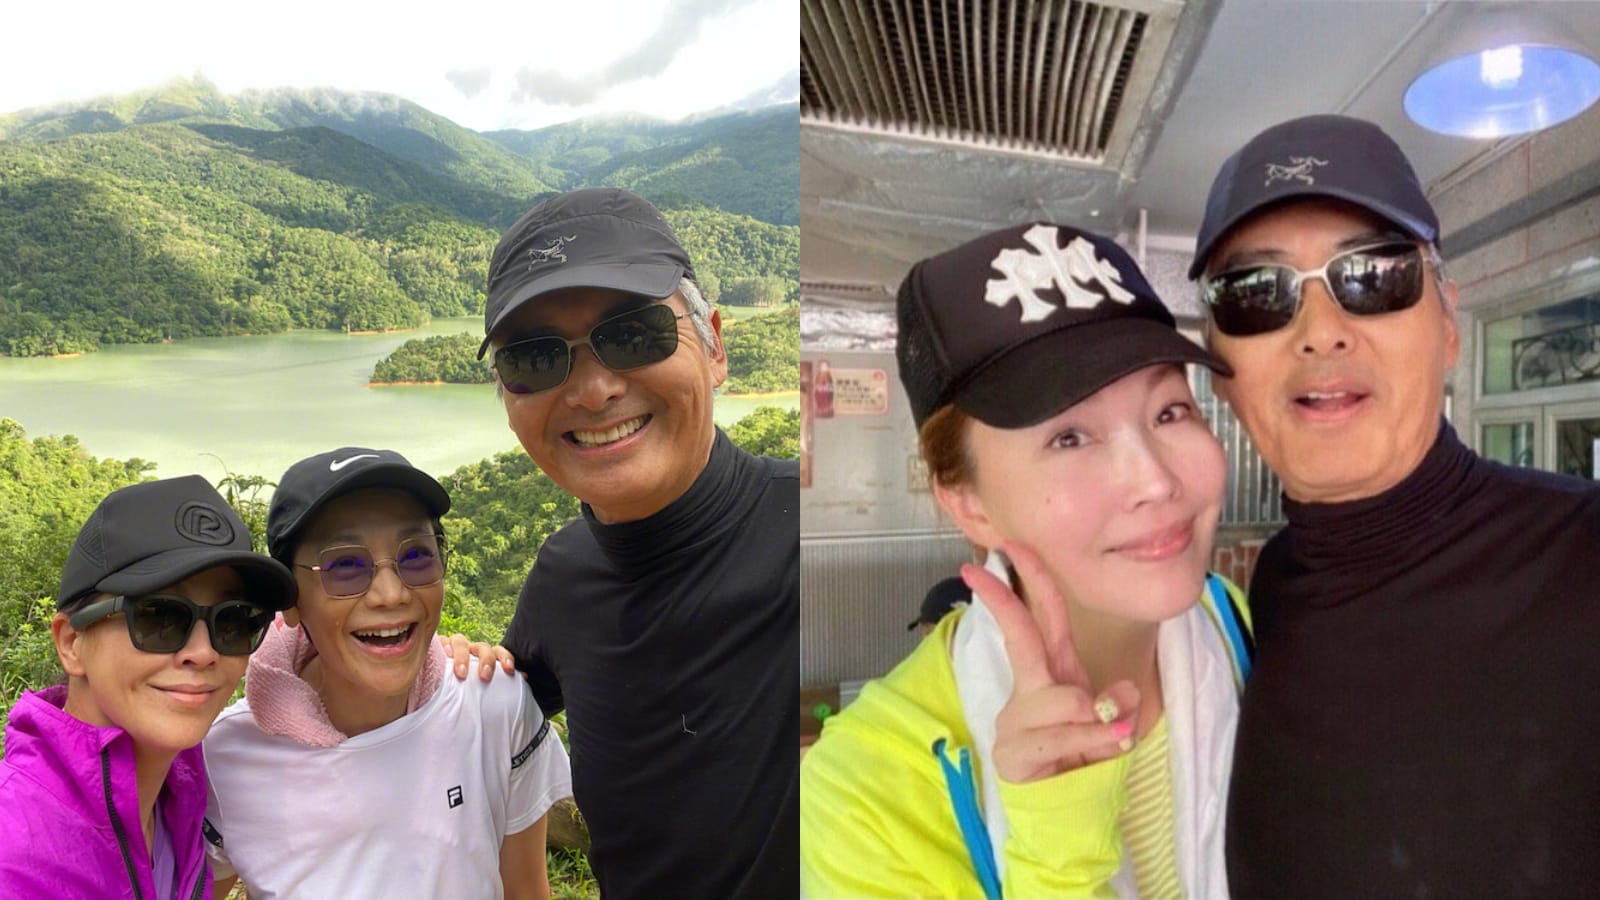 Chow Yun Fat’s White Hair Sparks Concern About How He’s Been Dealing With His Mother’s Death